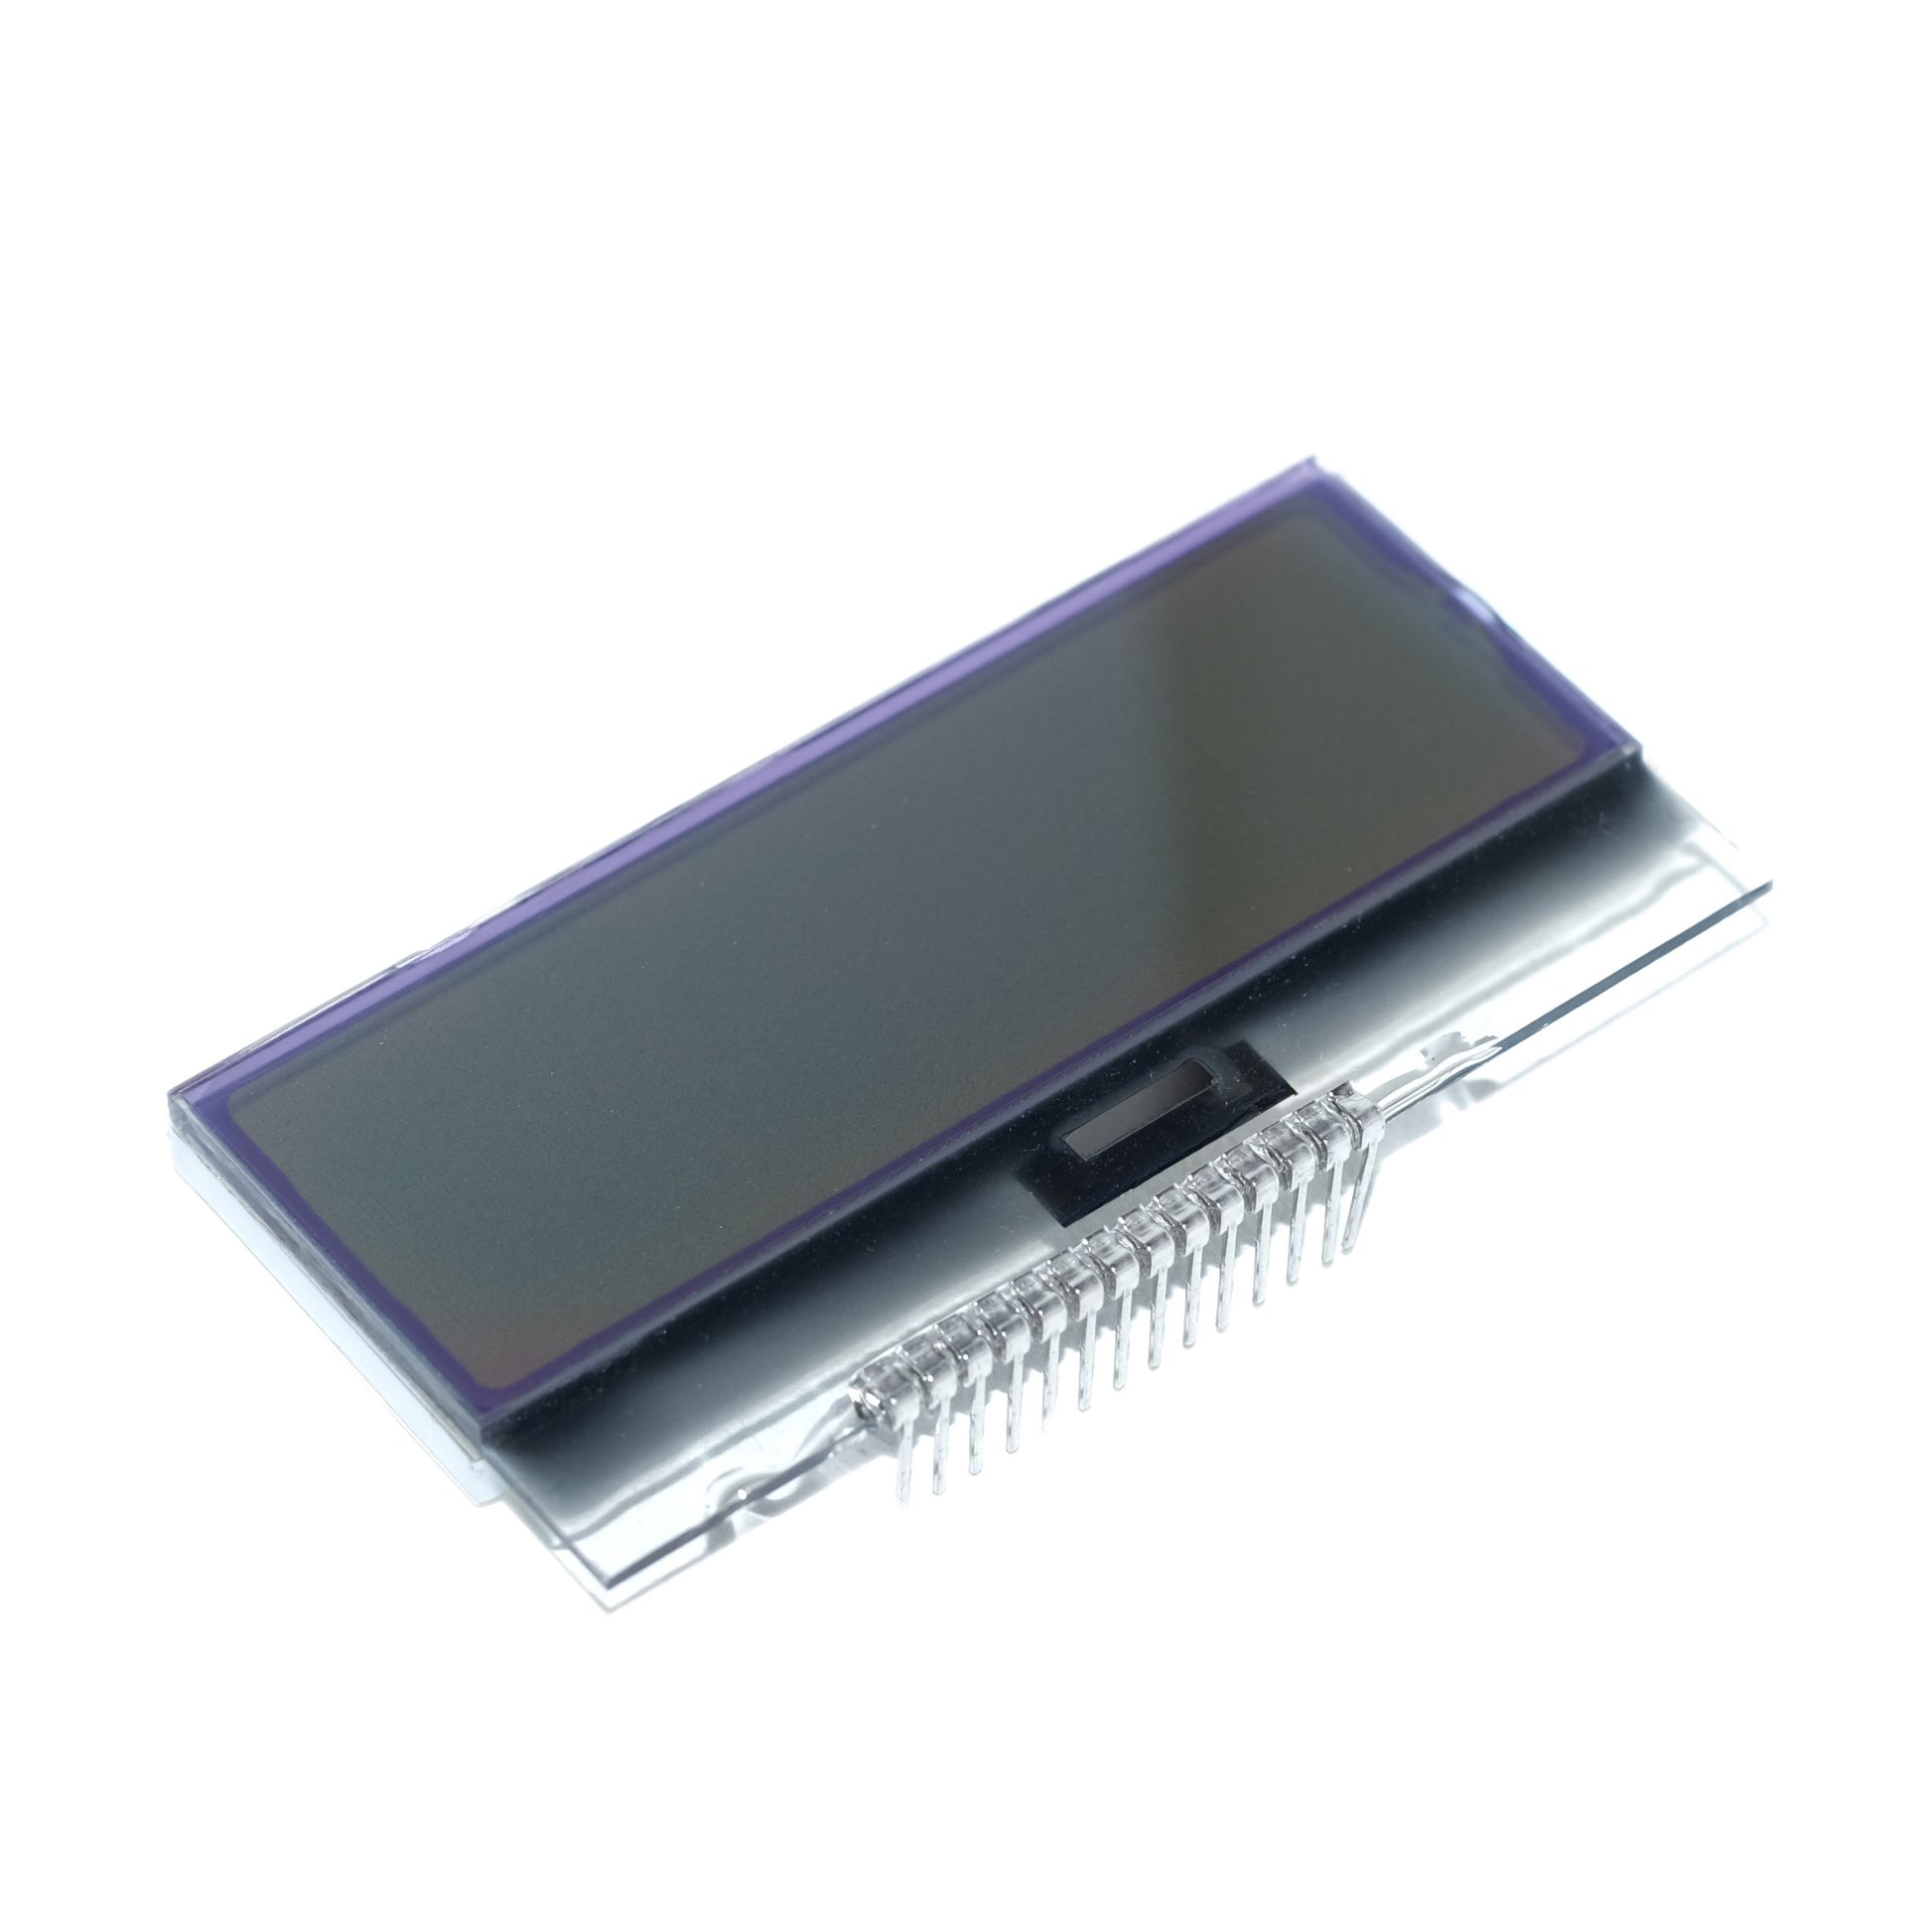 Side of 16x2 character COG LCD module